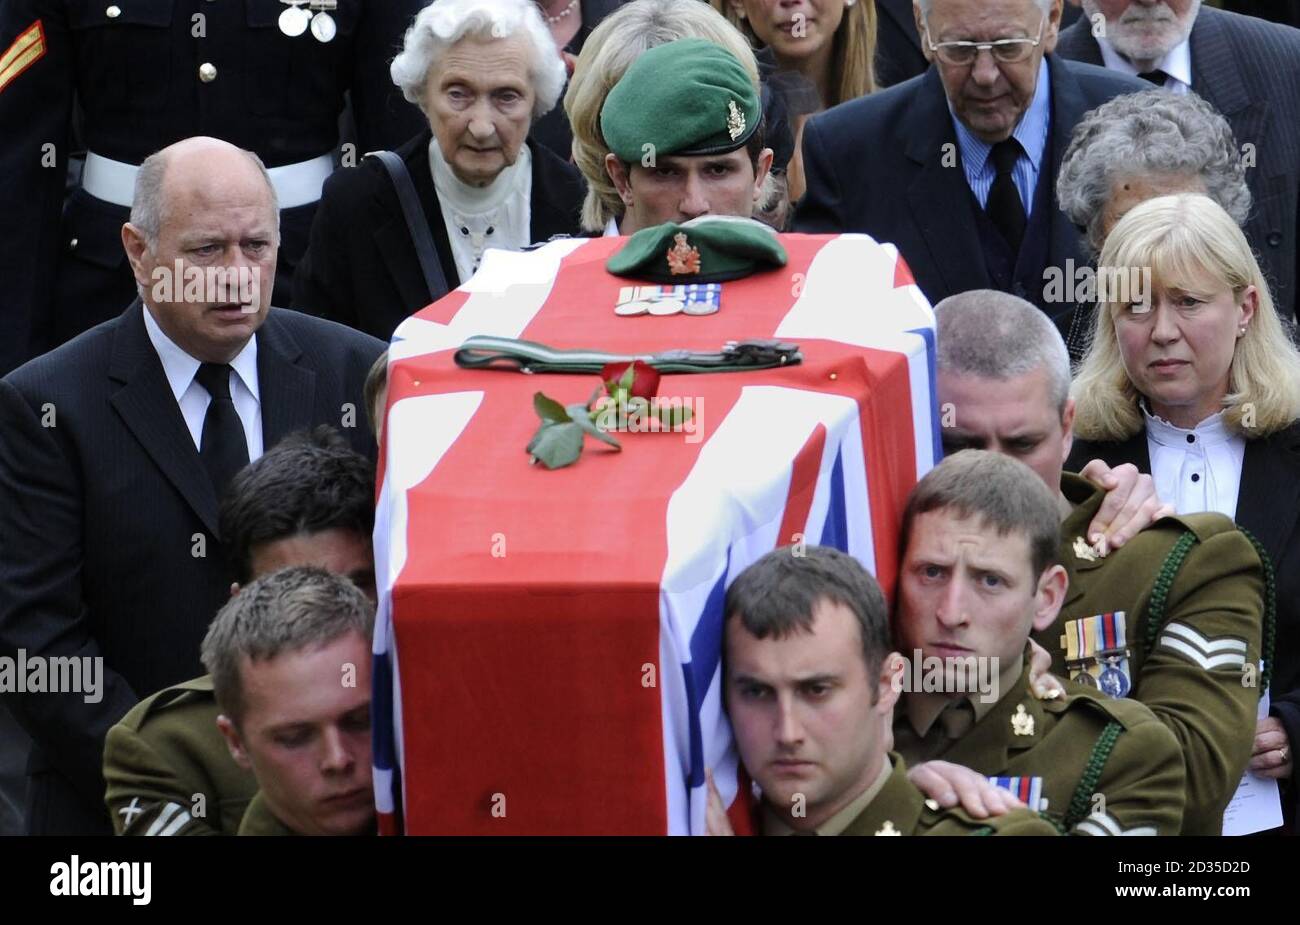 Cpl Carl Bryant (centre) is flanked by Des (left) and Maureen Feely, the parents of Corporal Sarah Bryant, as they follow her coffin at Holy Trinity Church, in Wetheral, near Carlisle, Cumbria. Stock Photo